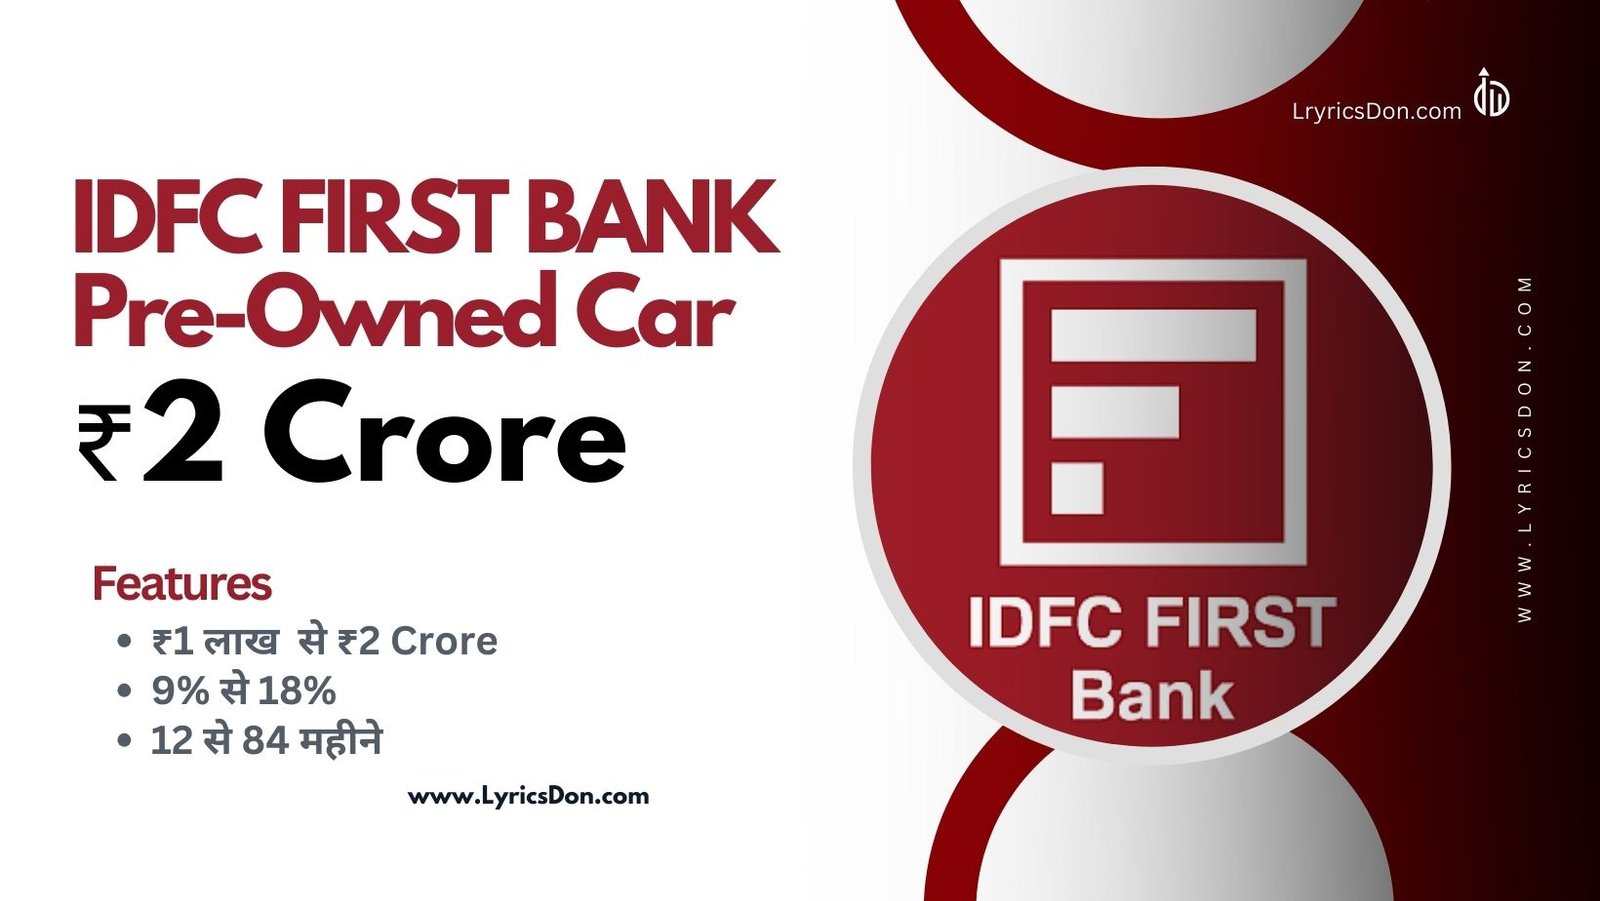 IDFC First Bank Pre-Owned Car Loan Amount